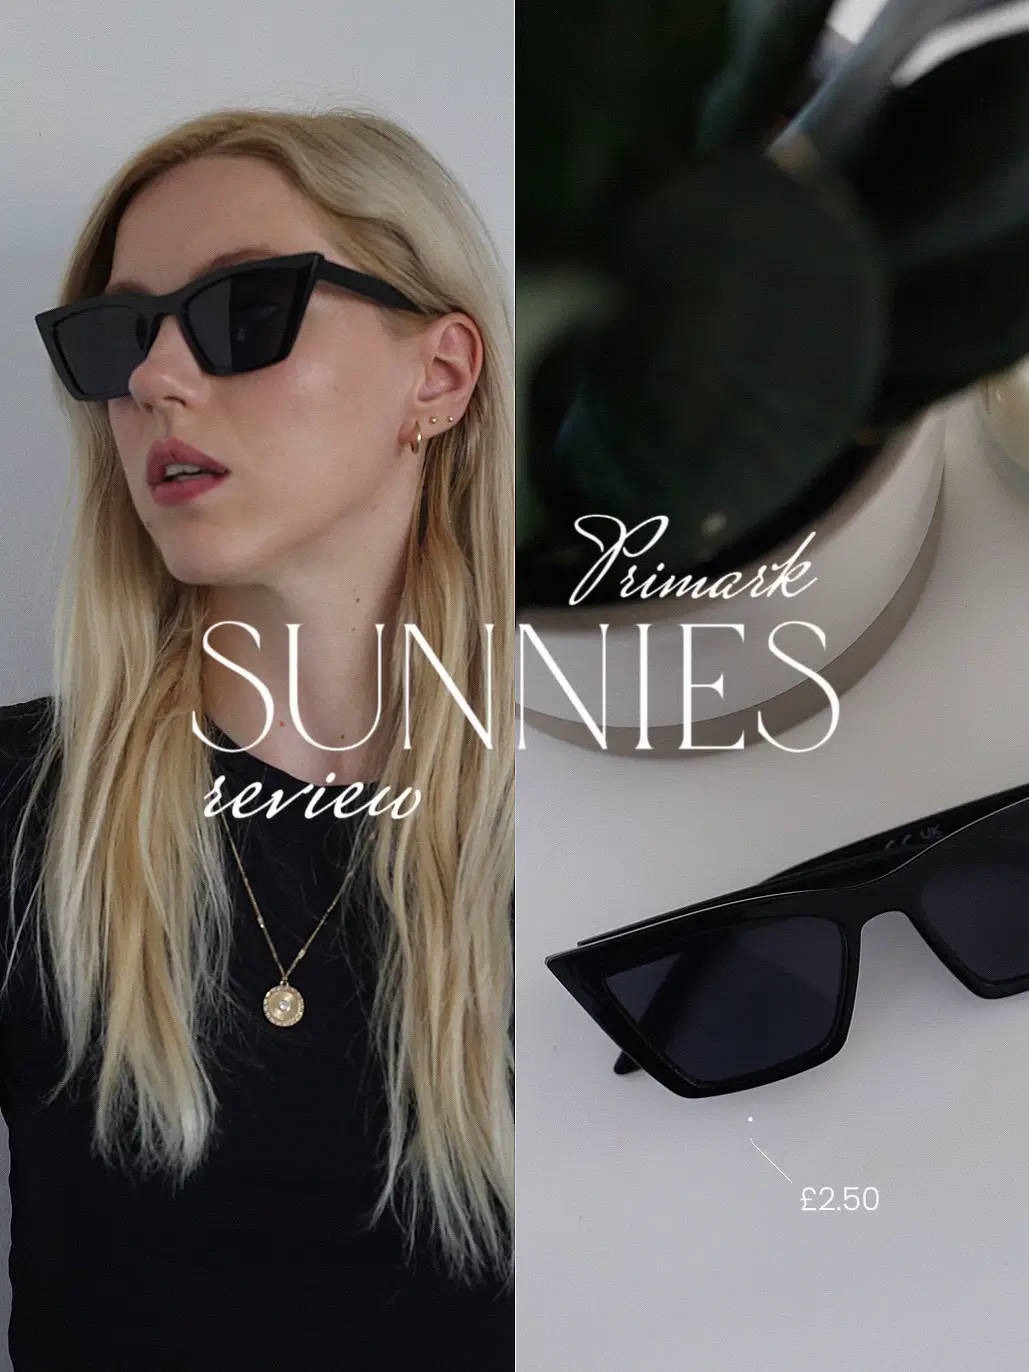 Saint Laurent Mica Sunglasses Review, Gallery posted by StephaniePernas